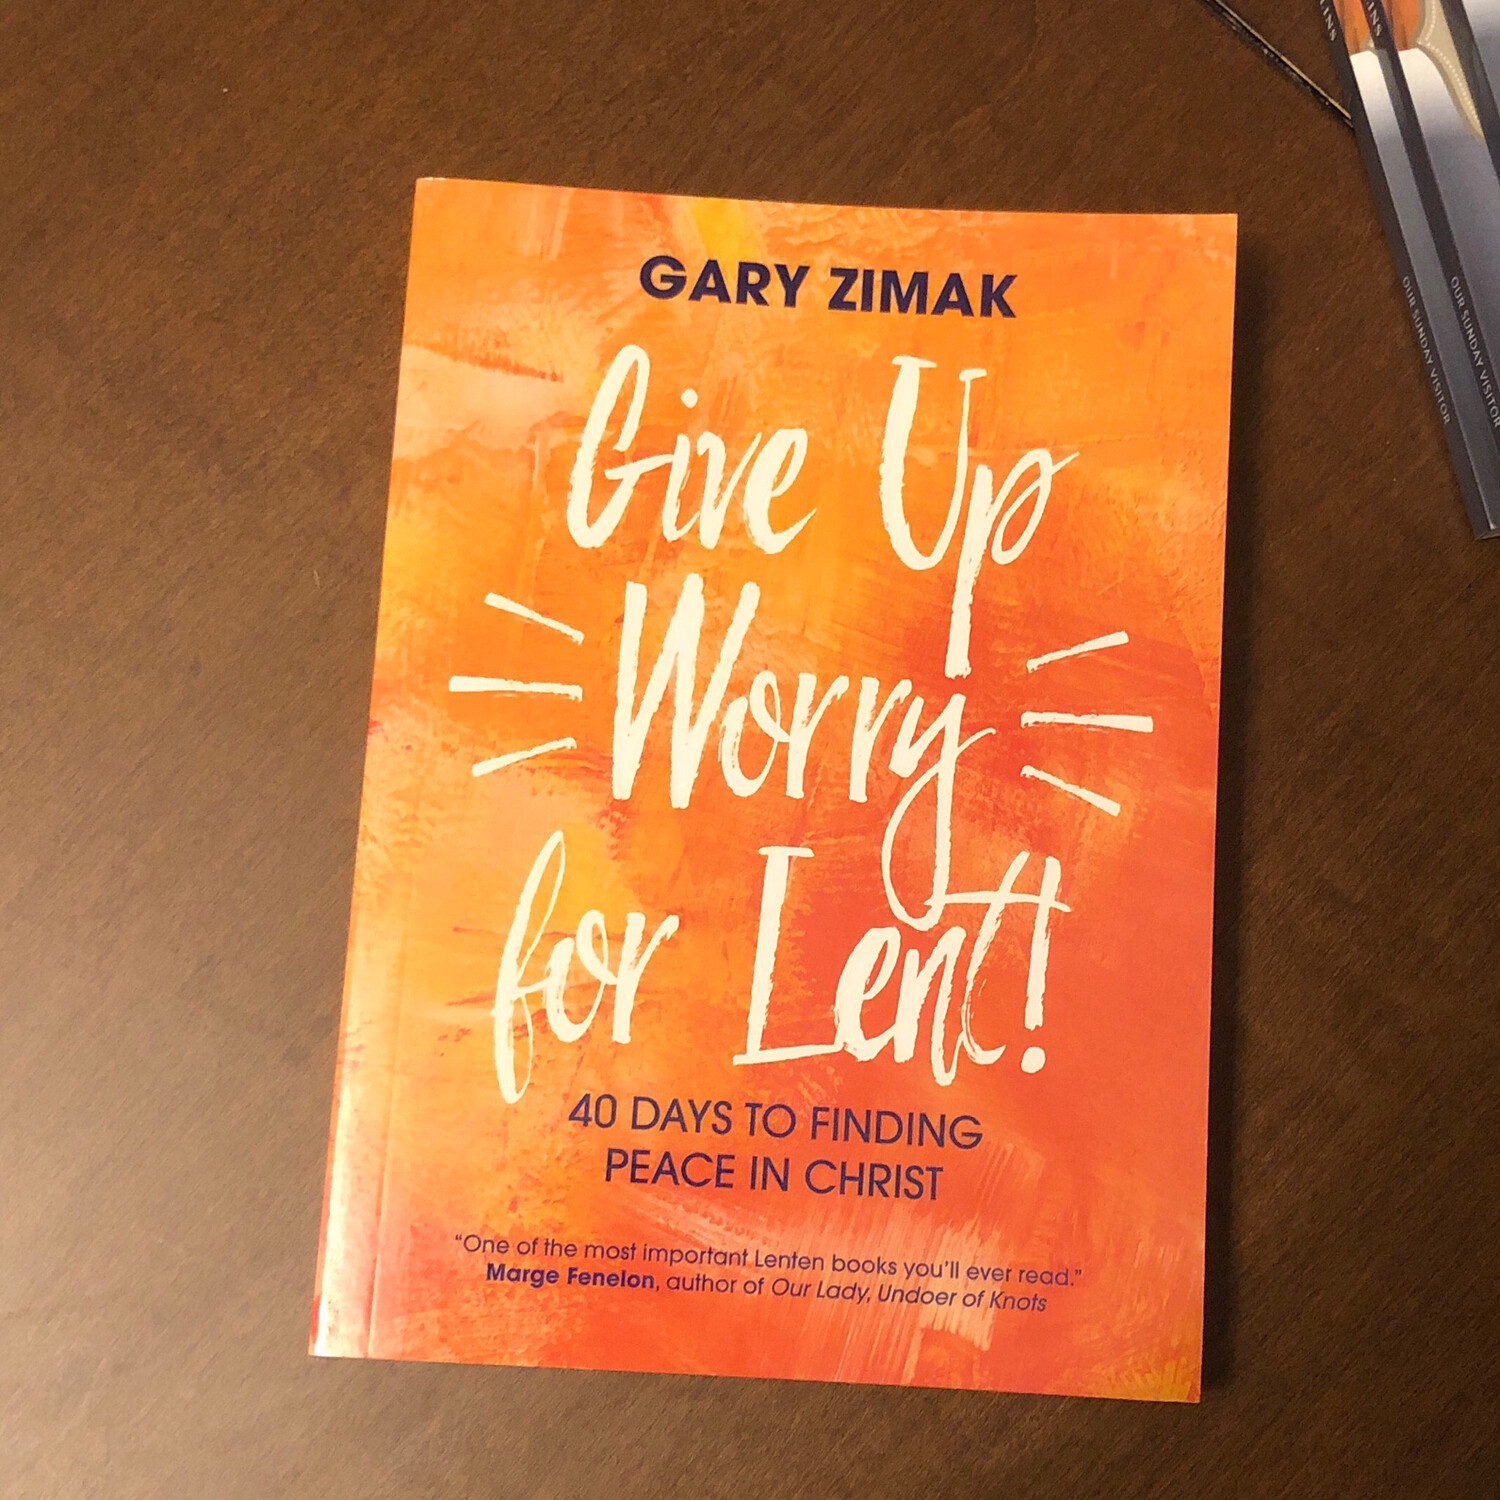 Give Up Worry for Lent: 40 Days to Finding Peace in Christ by Gary Zimak